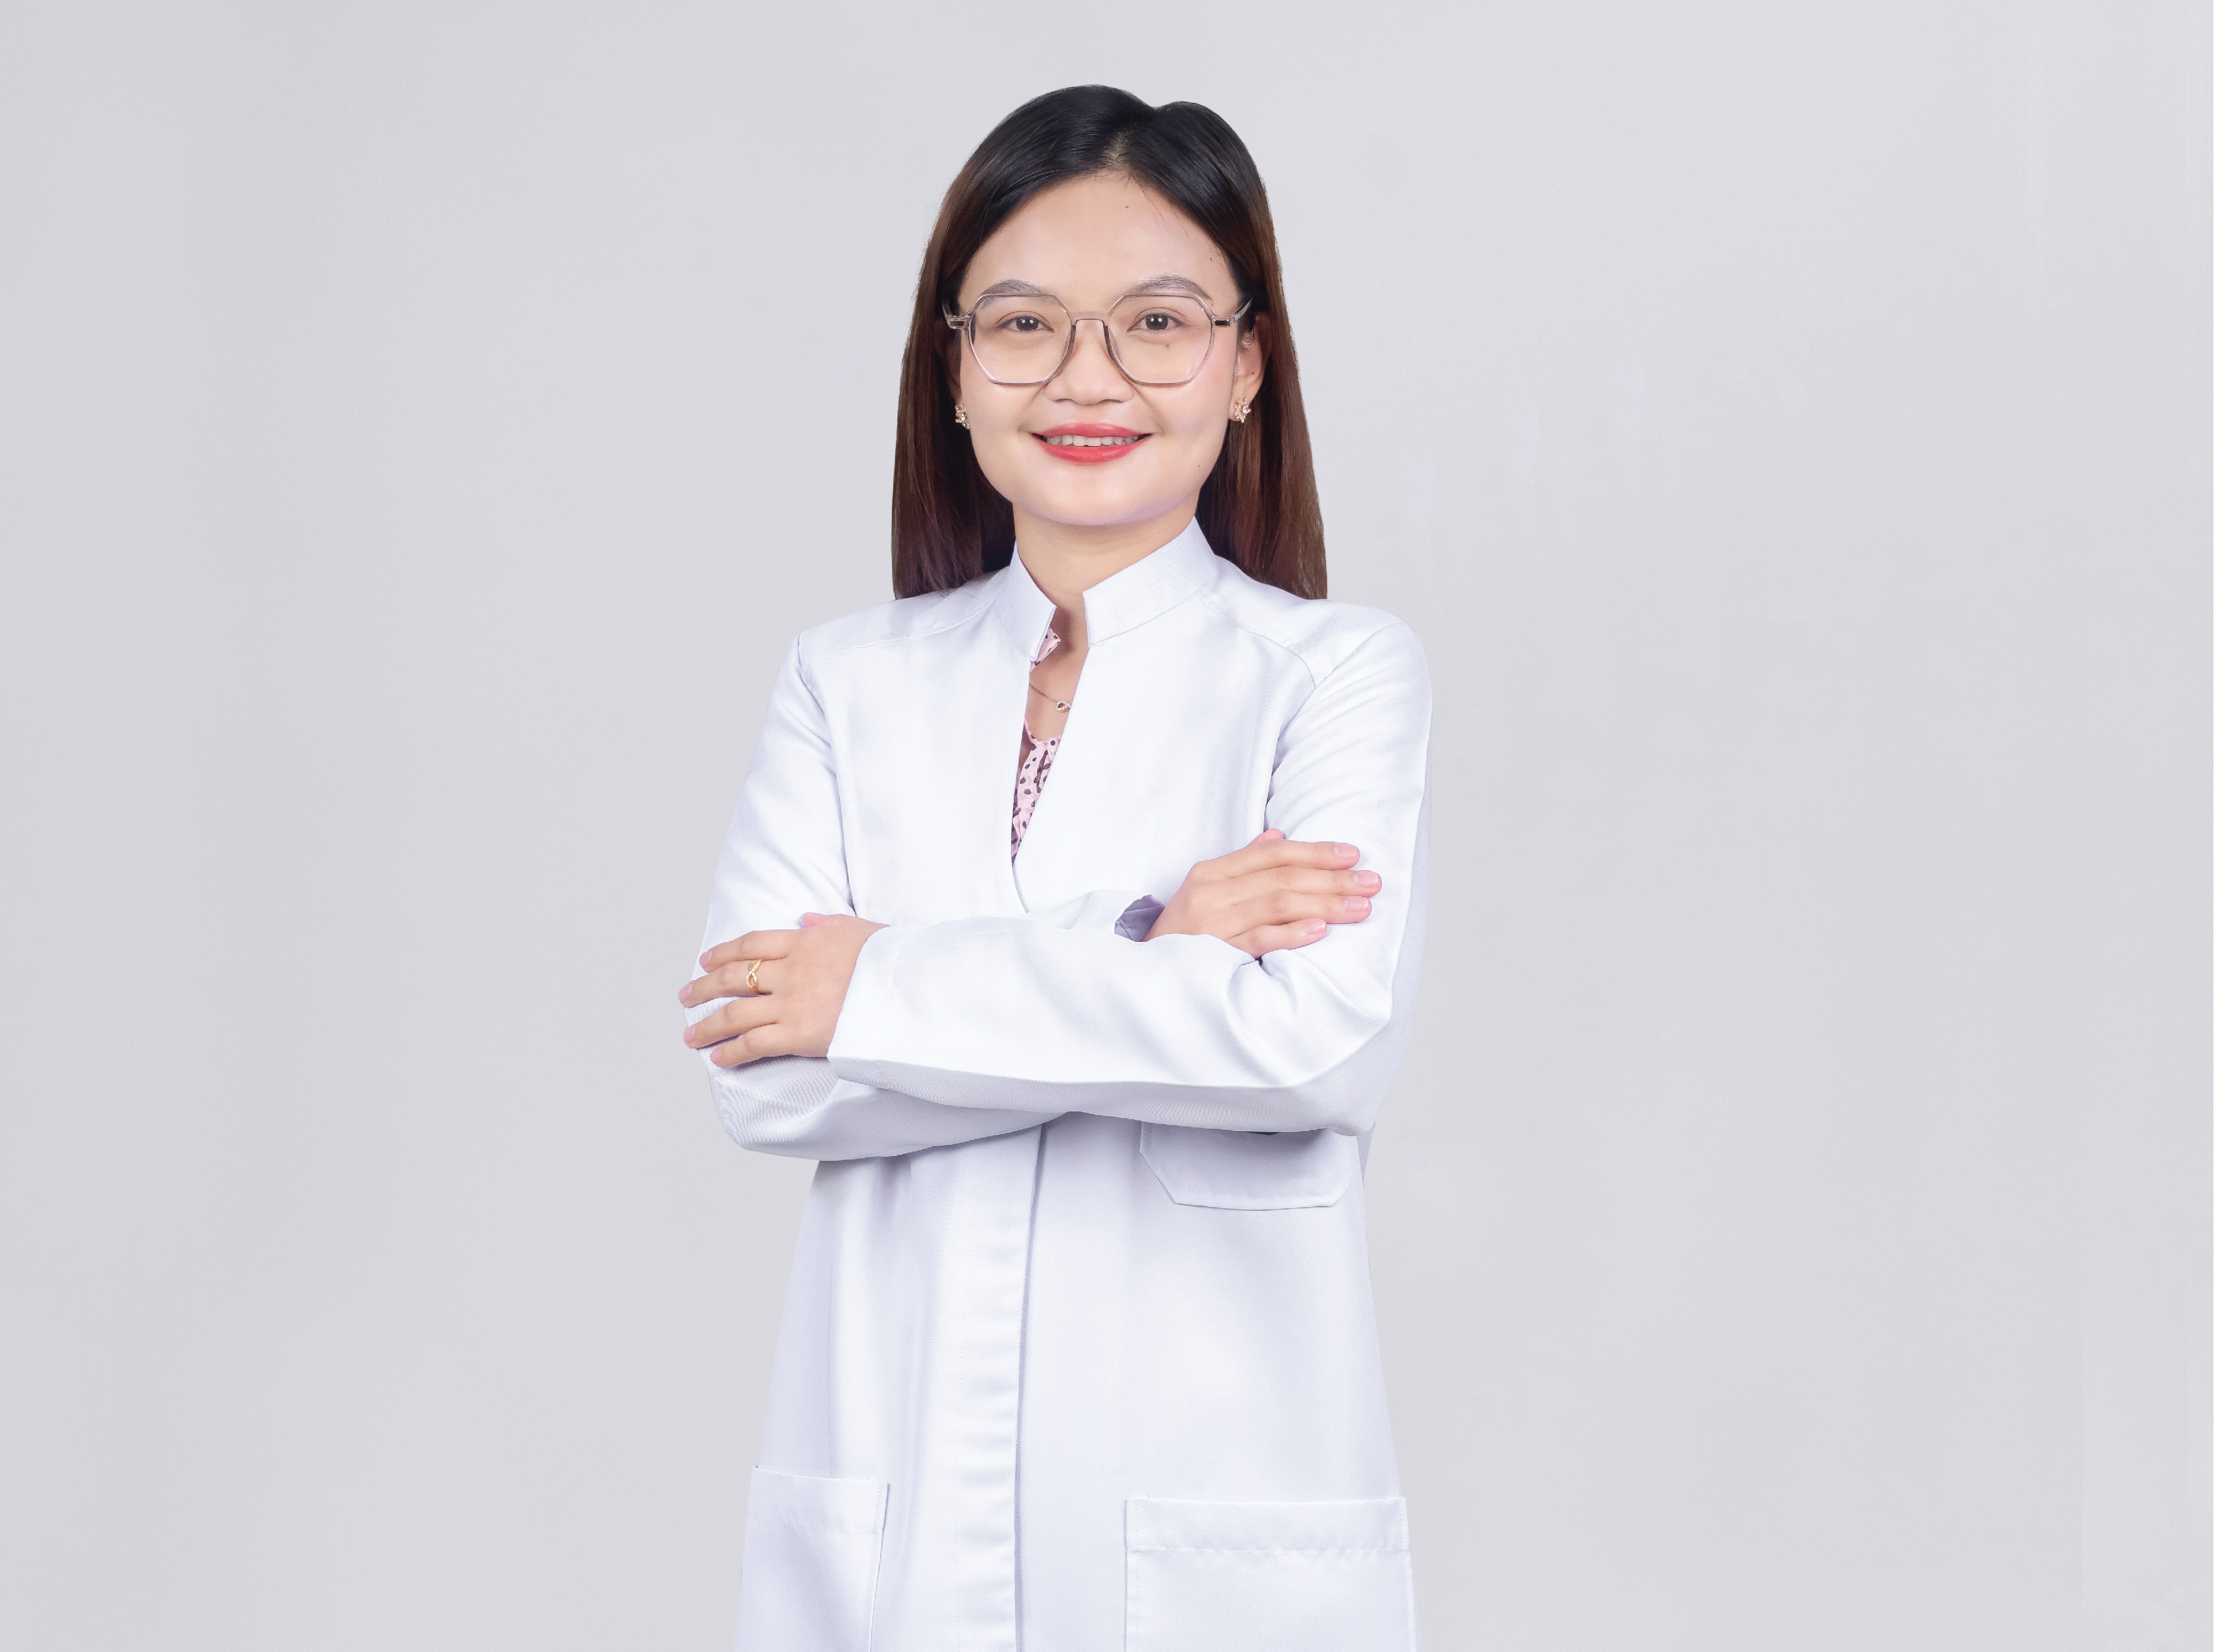 Dr. Youlin Ly